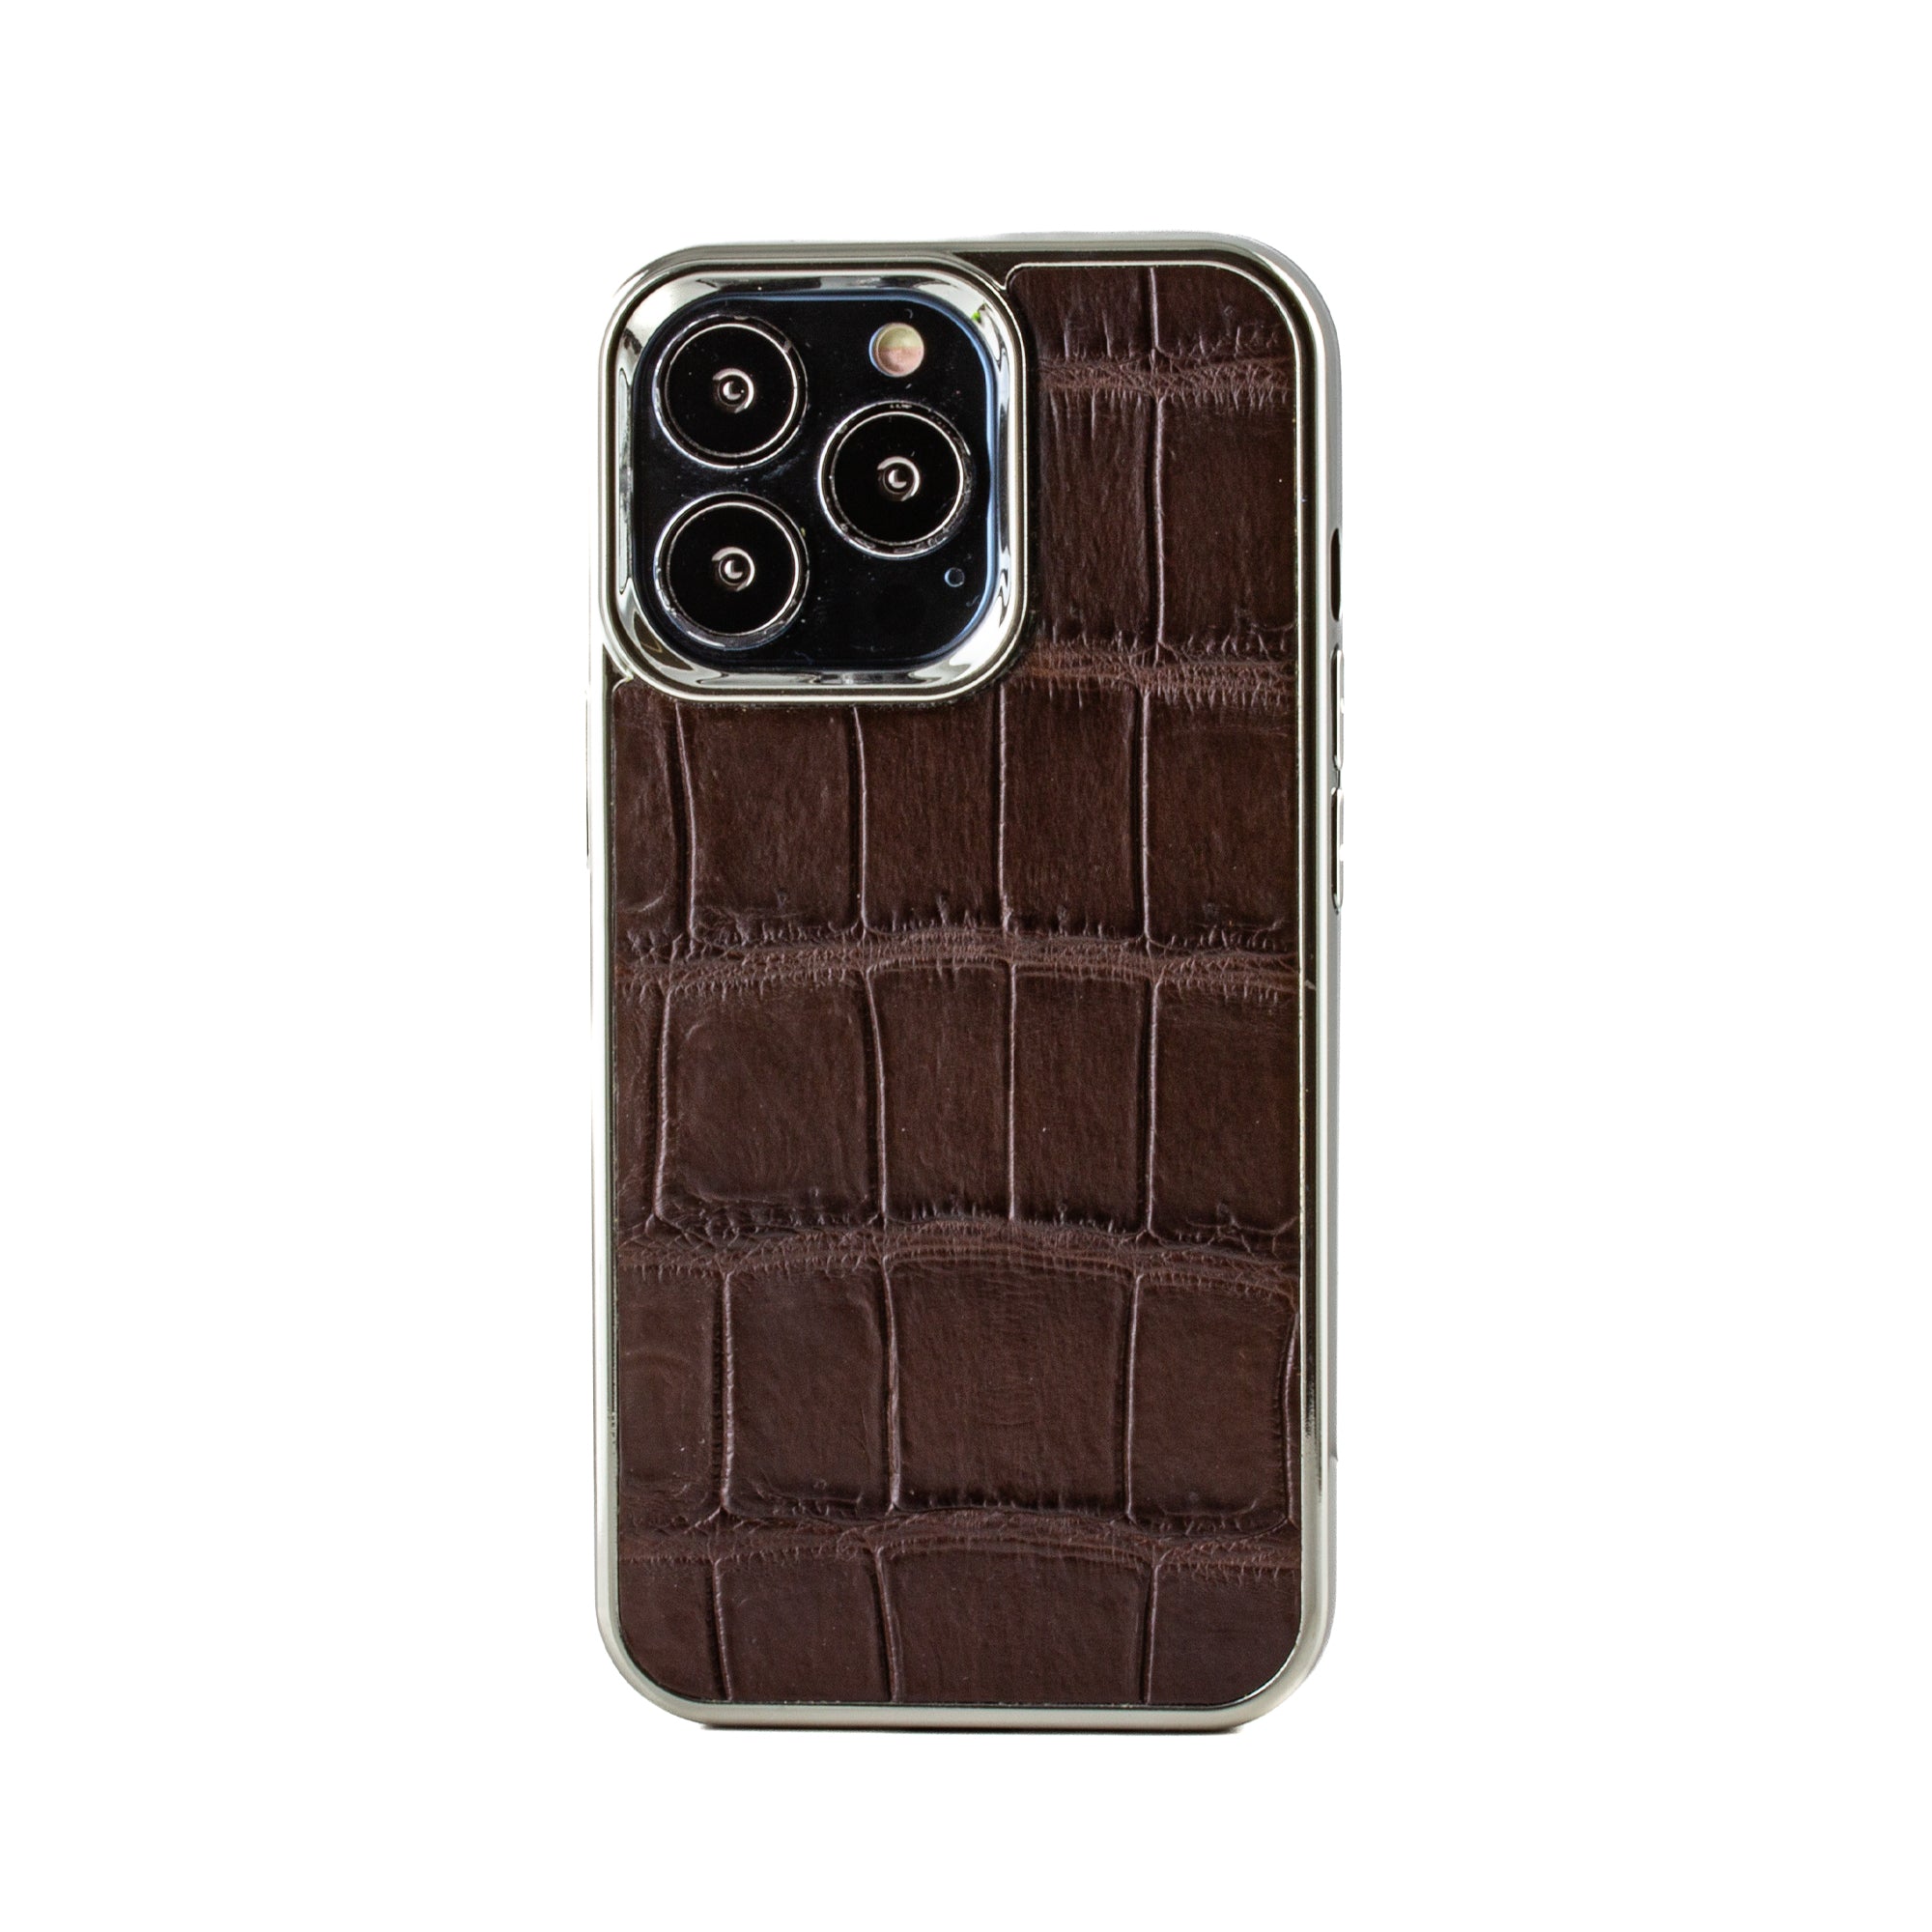 Clearance Sale - Leather iPhone "Sport Case" - iPhone 13 Pro - Brown alligator